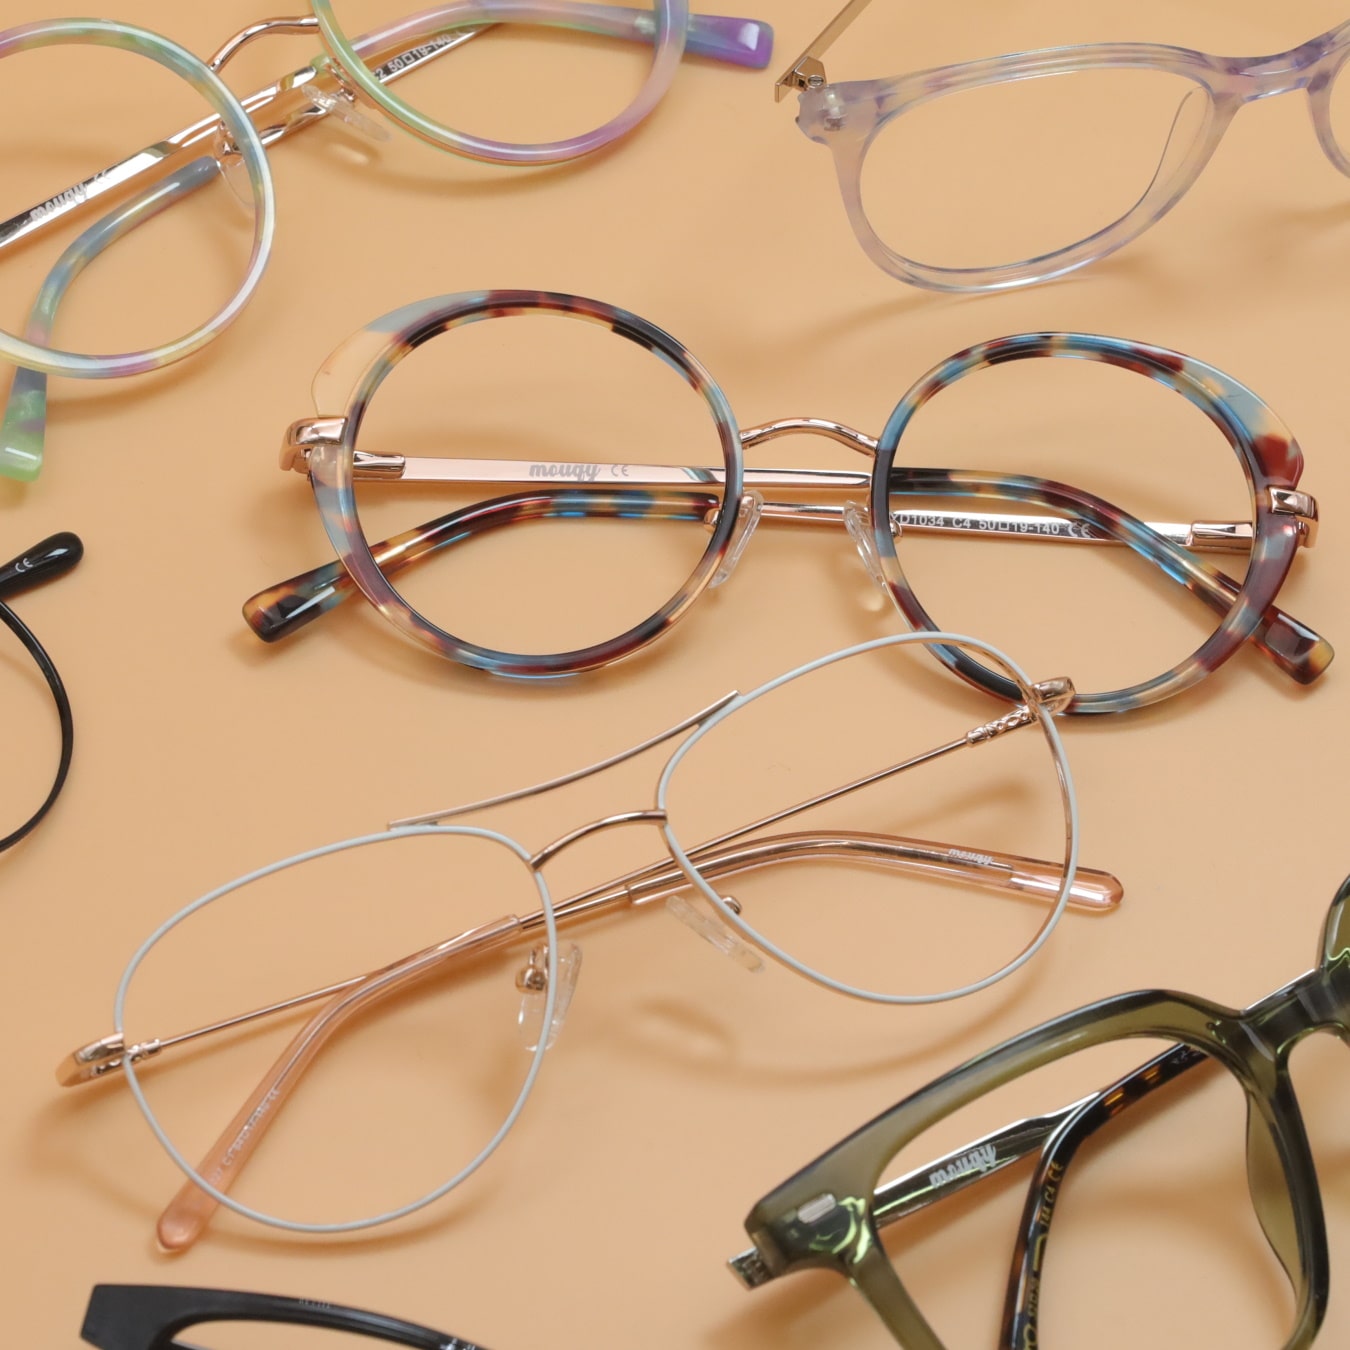 glasses frames of assorted styles